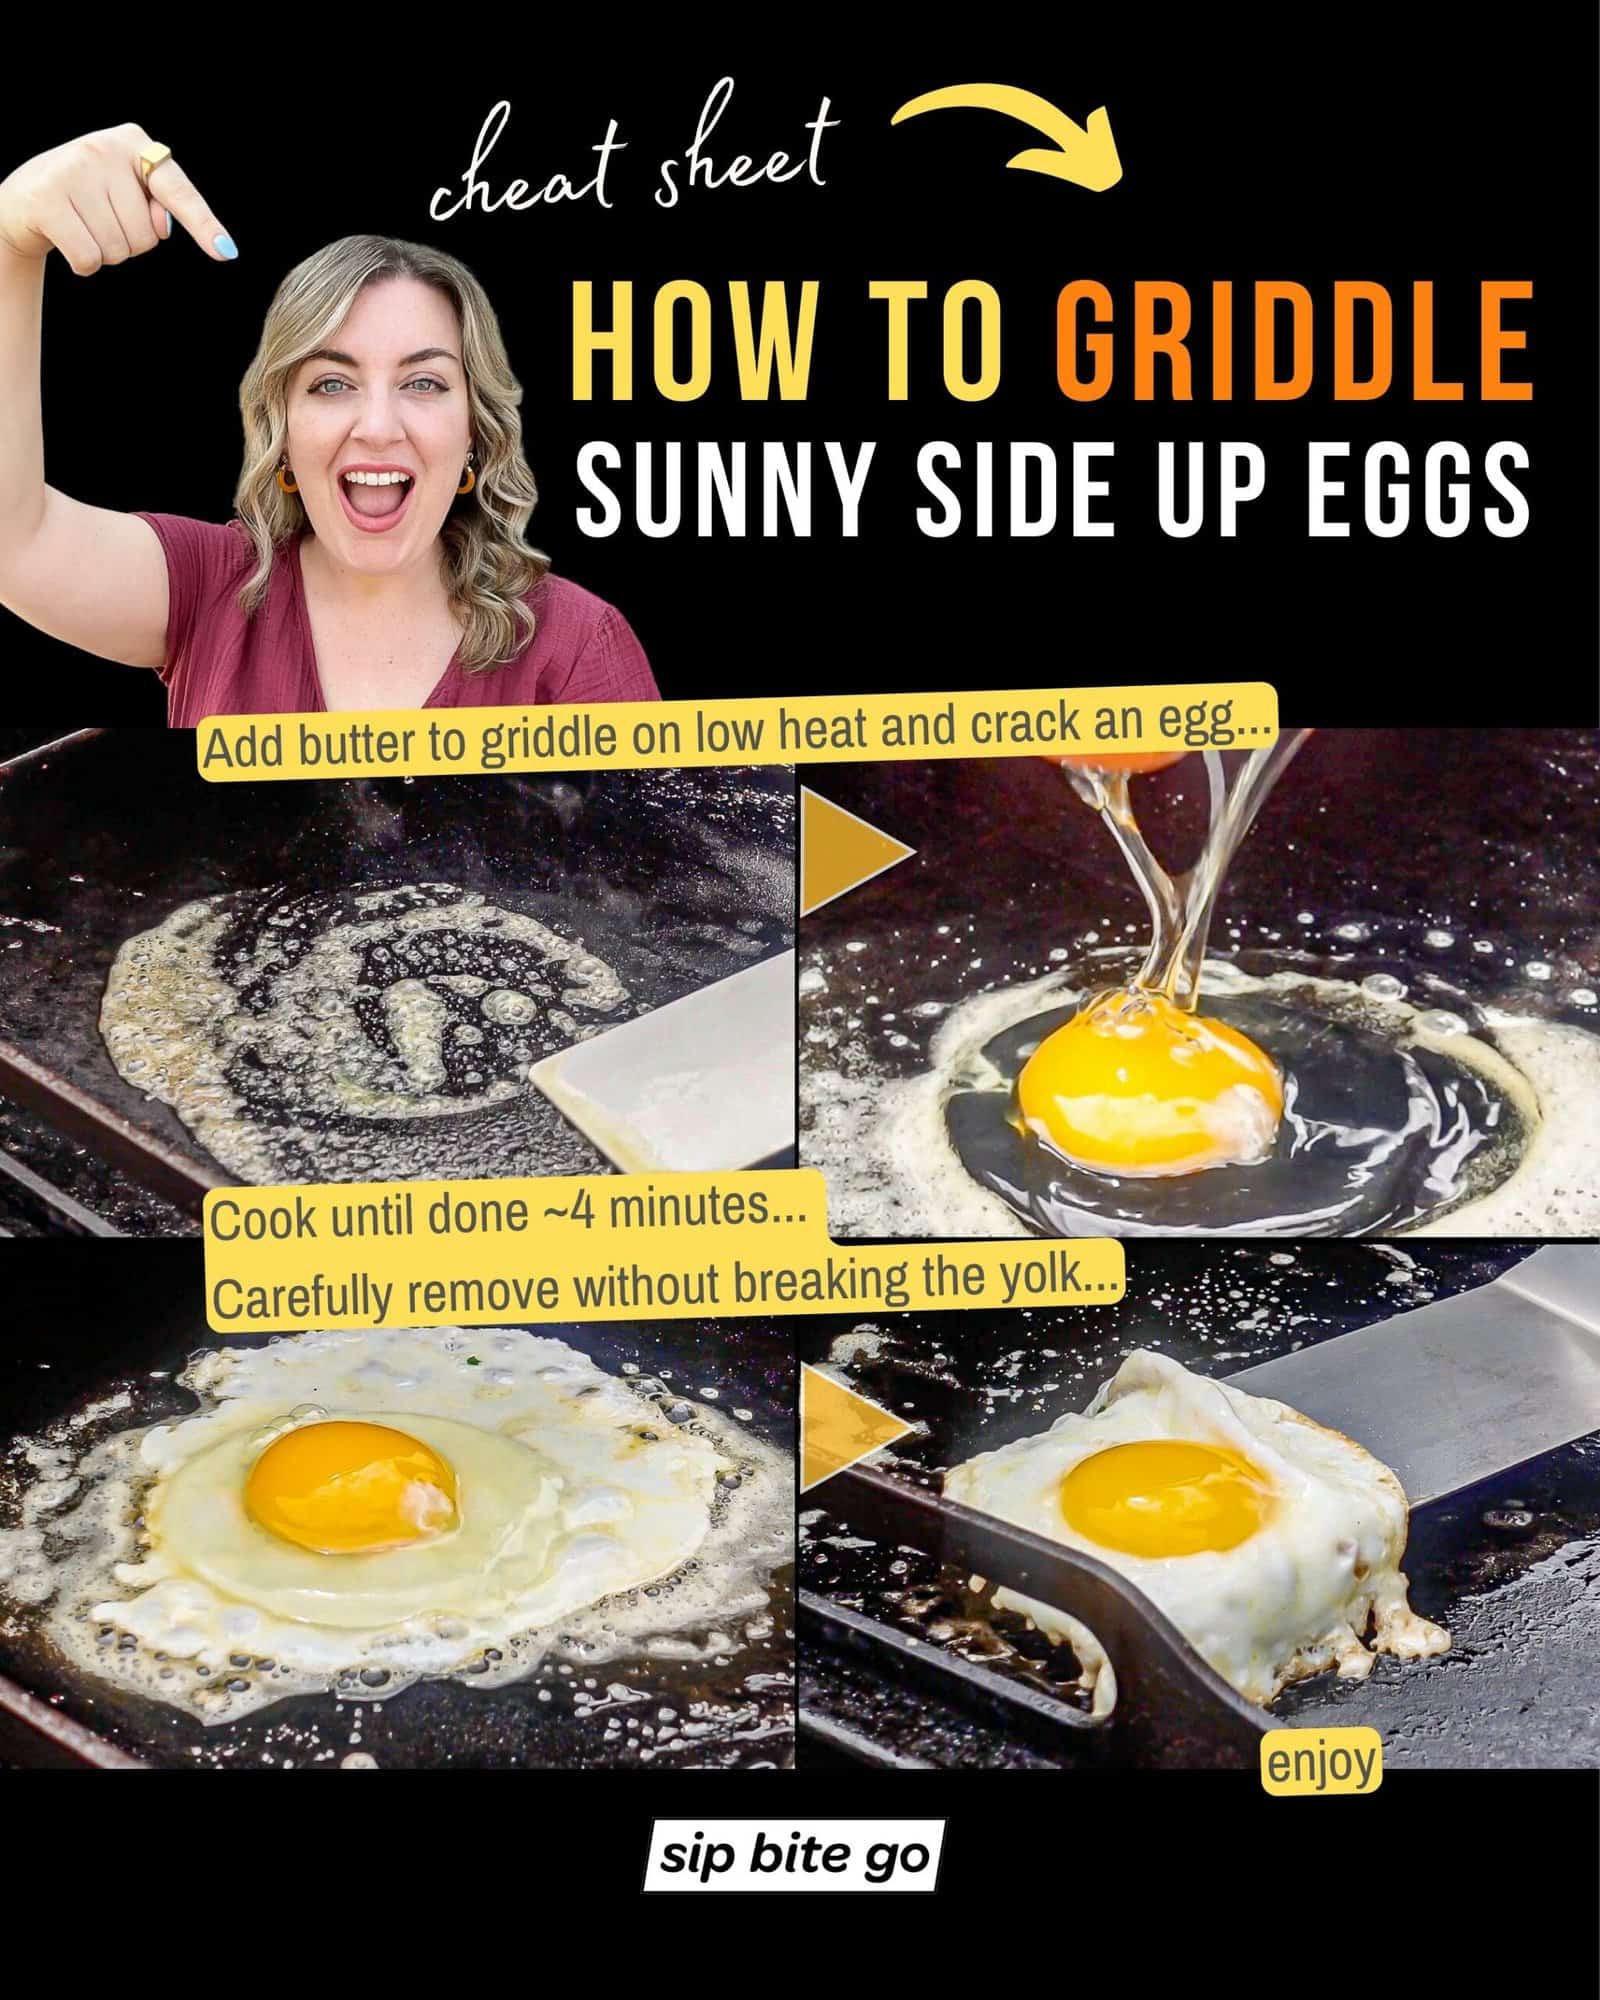 Infographic demonstrating recipe steps for how to griddle sunny side up eggs with Jenna Passaro and Sip Bite Go logo